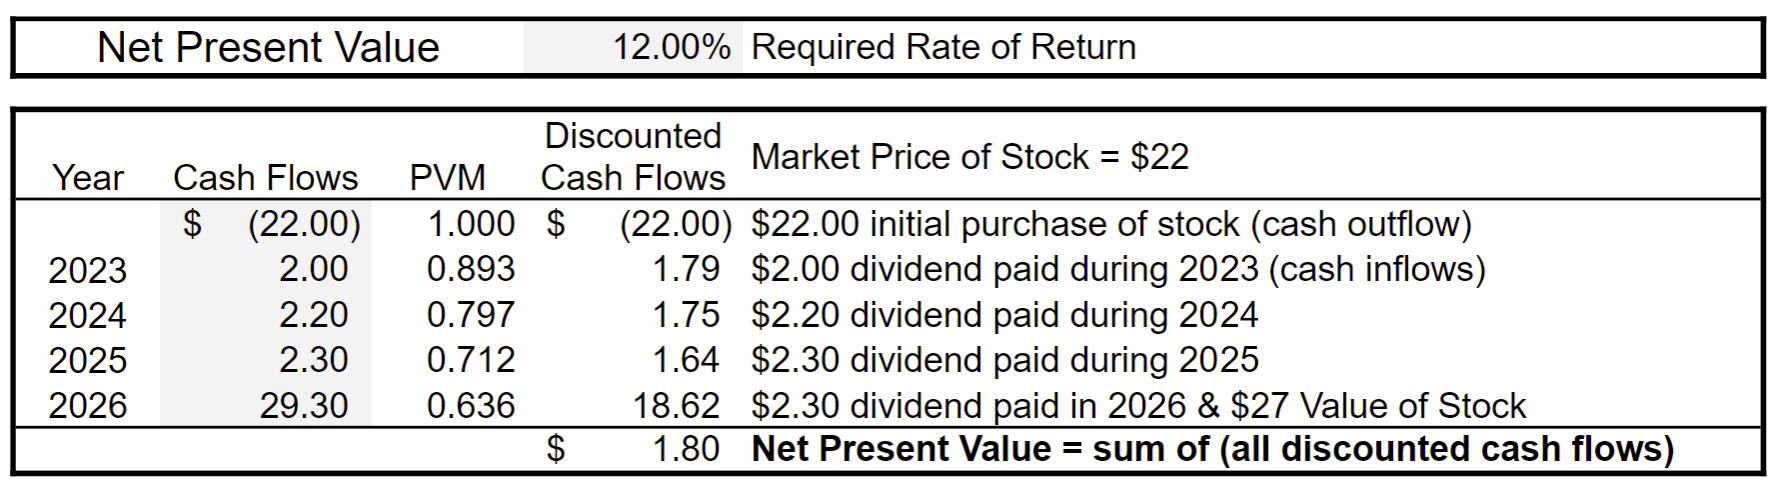 To calculate the Net Present Value using our spreadsheet, we need to include both cash inflows and outflows. In this example, the cash outflow is the initial purchase of the stock. Our Required Rate of Return is 12%.